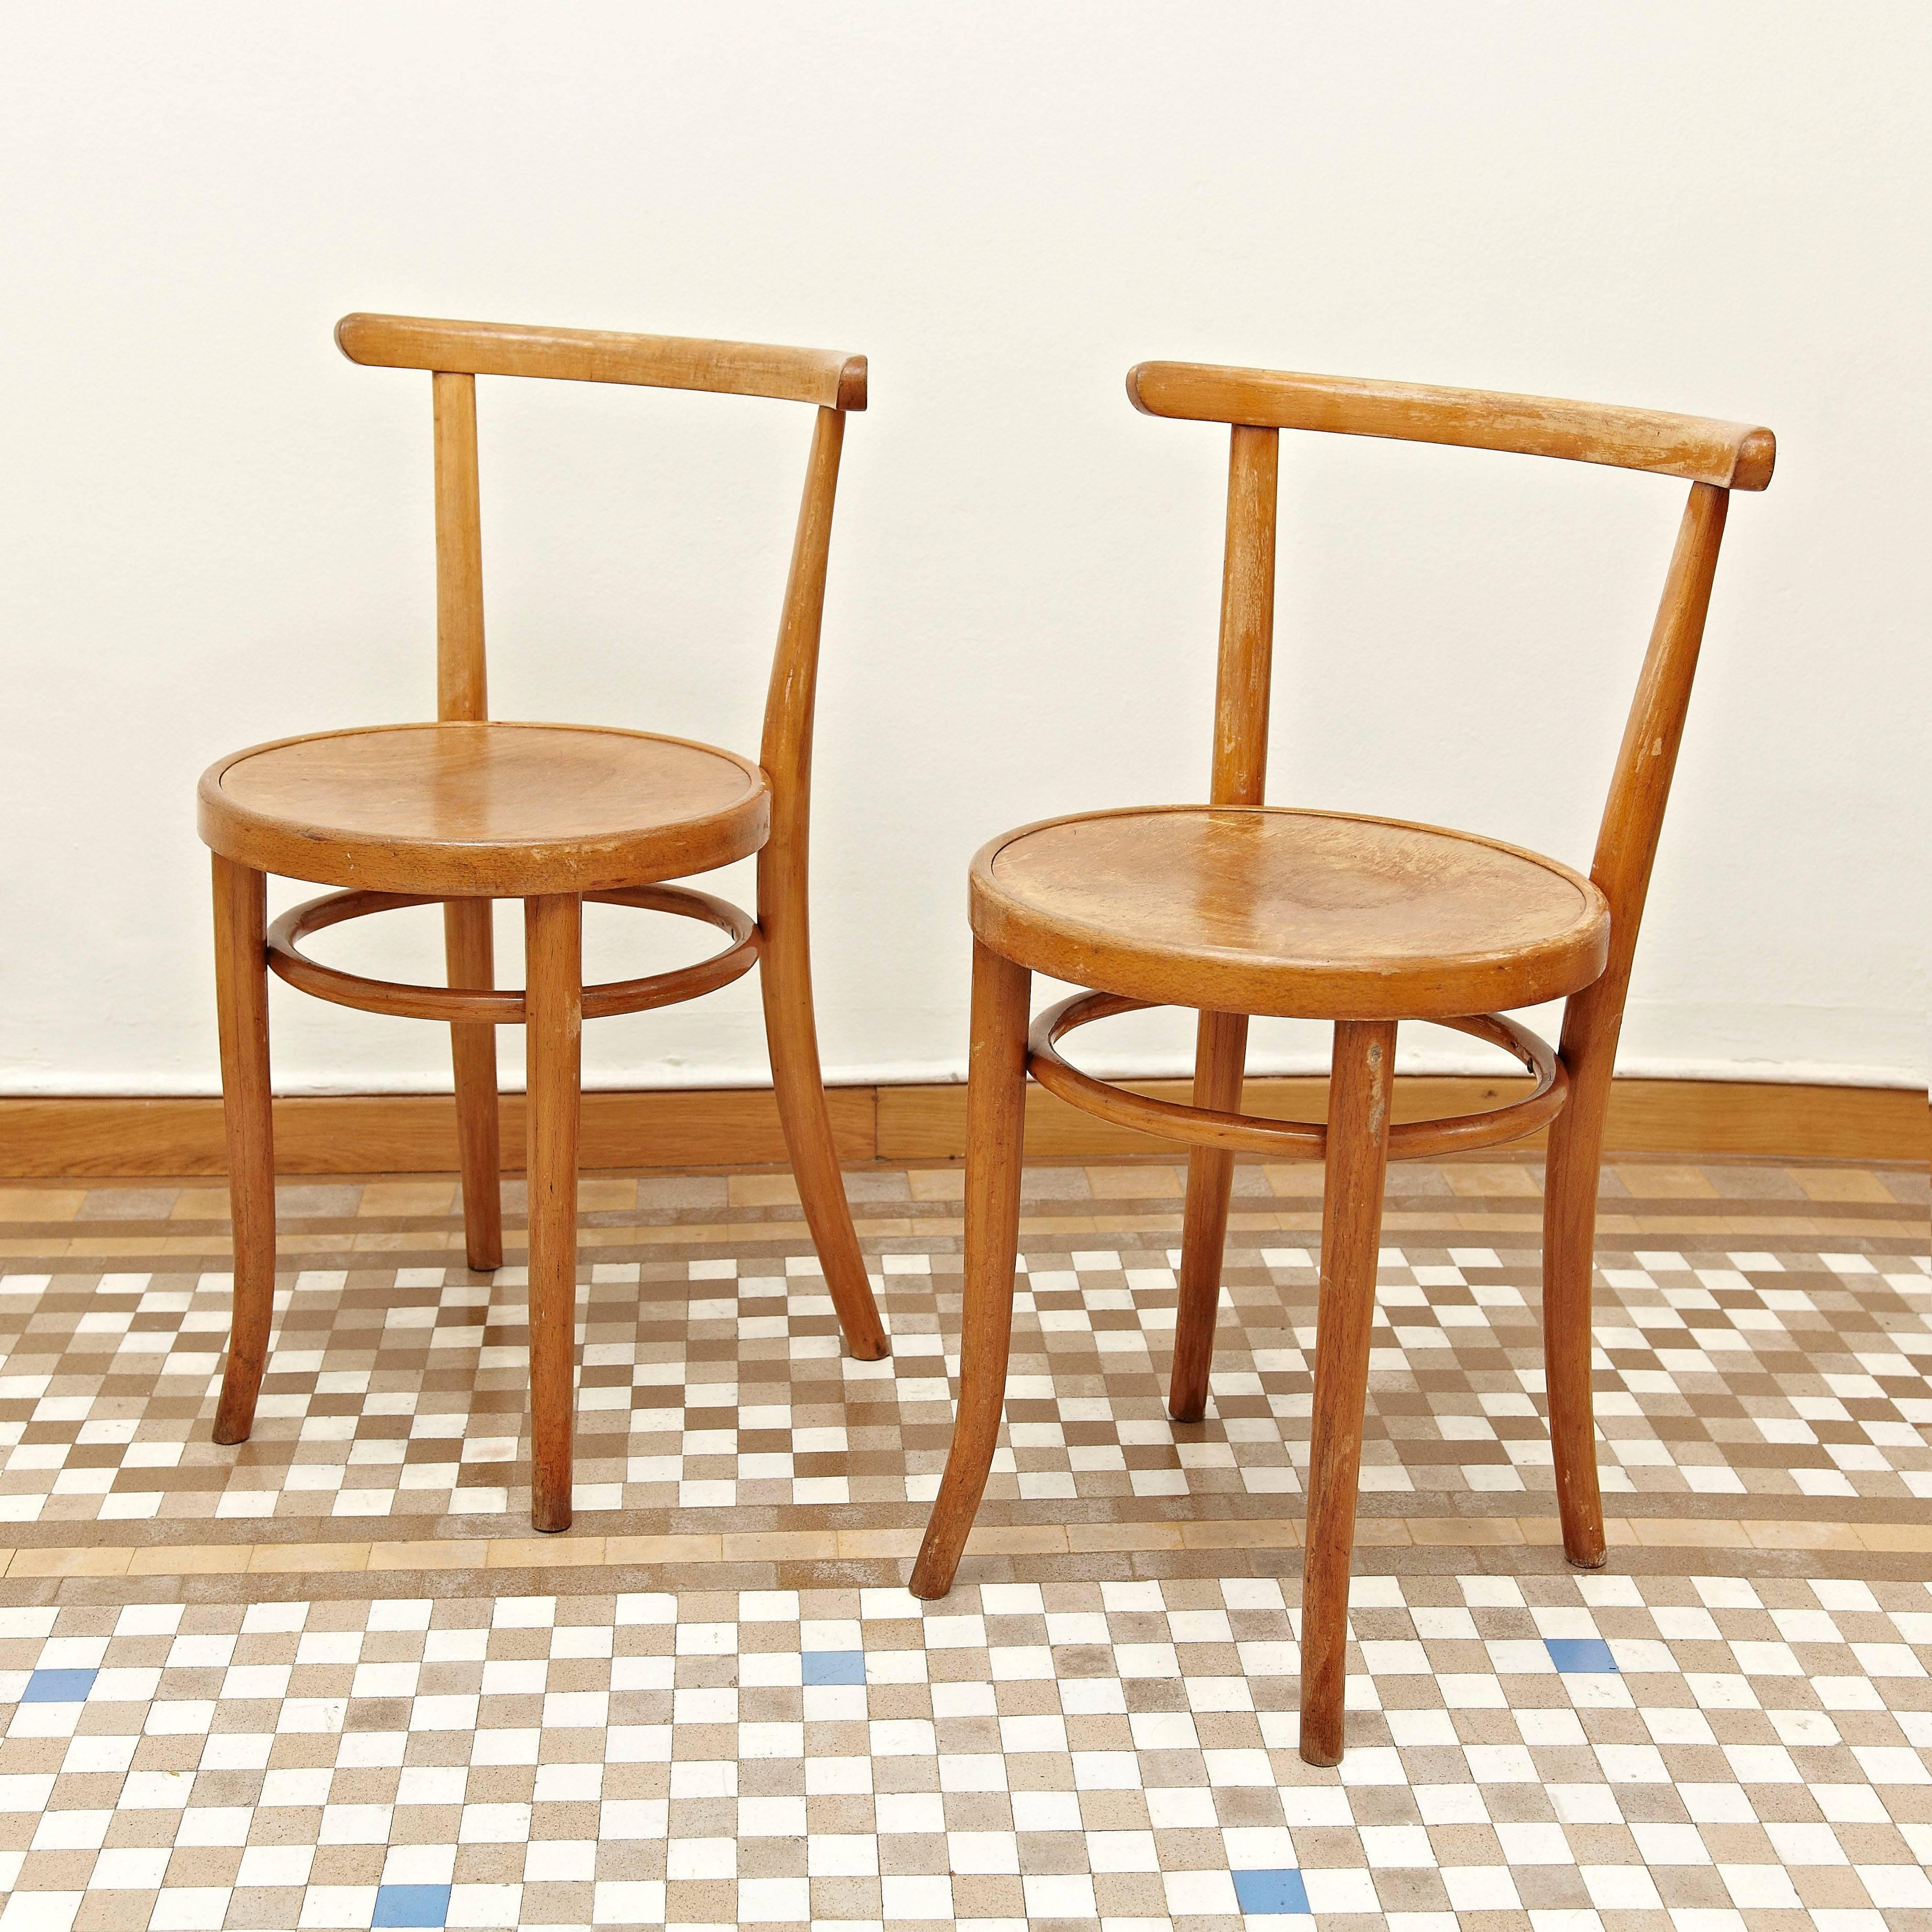 Set of Four Thonet 51 Chair by Auguste Thonet for Thonet 2